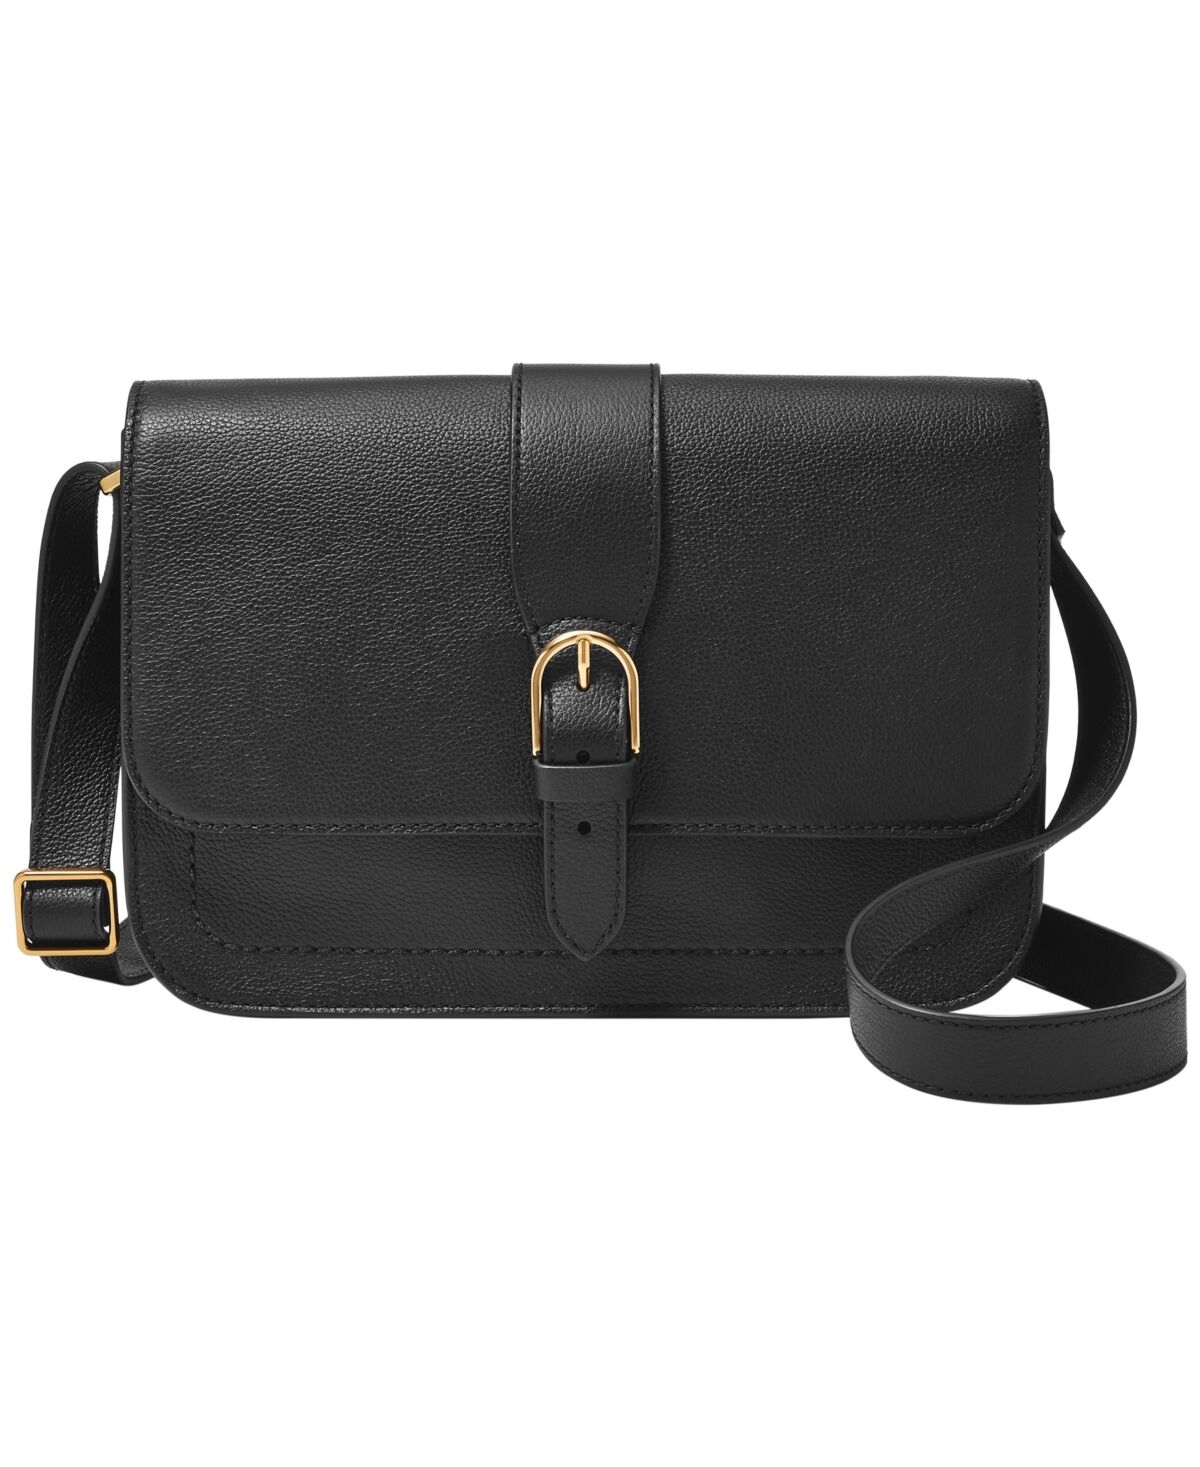 Fossil Large Zoey Leather Crossbody Bag - Black